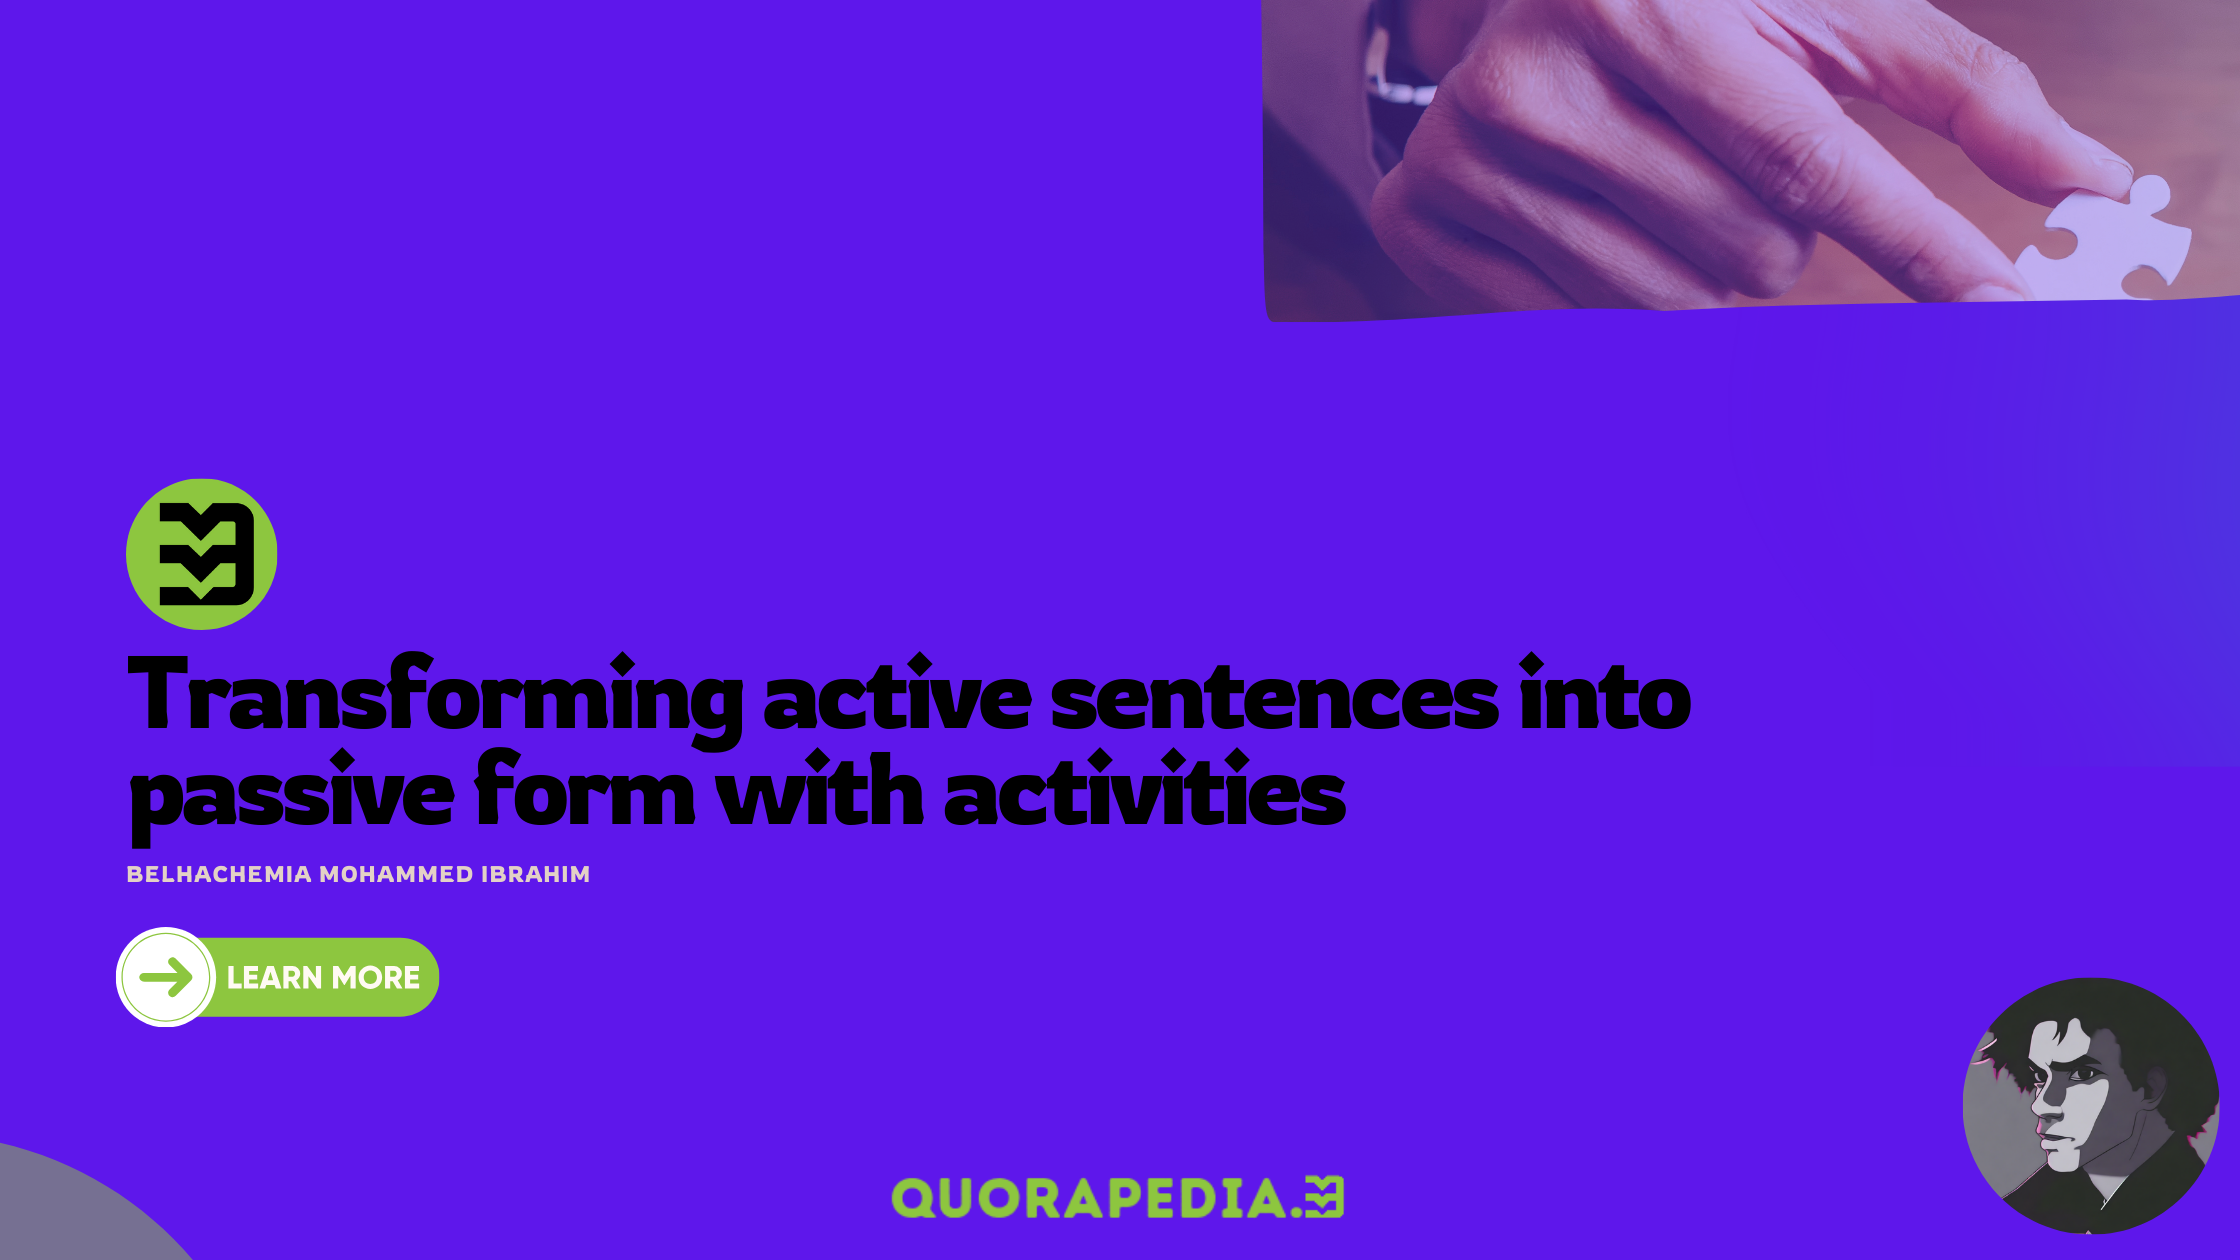 Transforming active sentences into passive form with activities